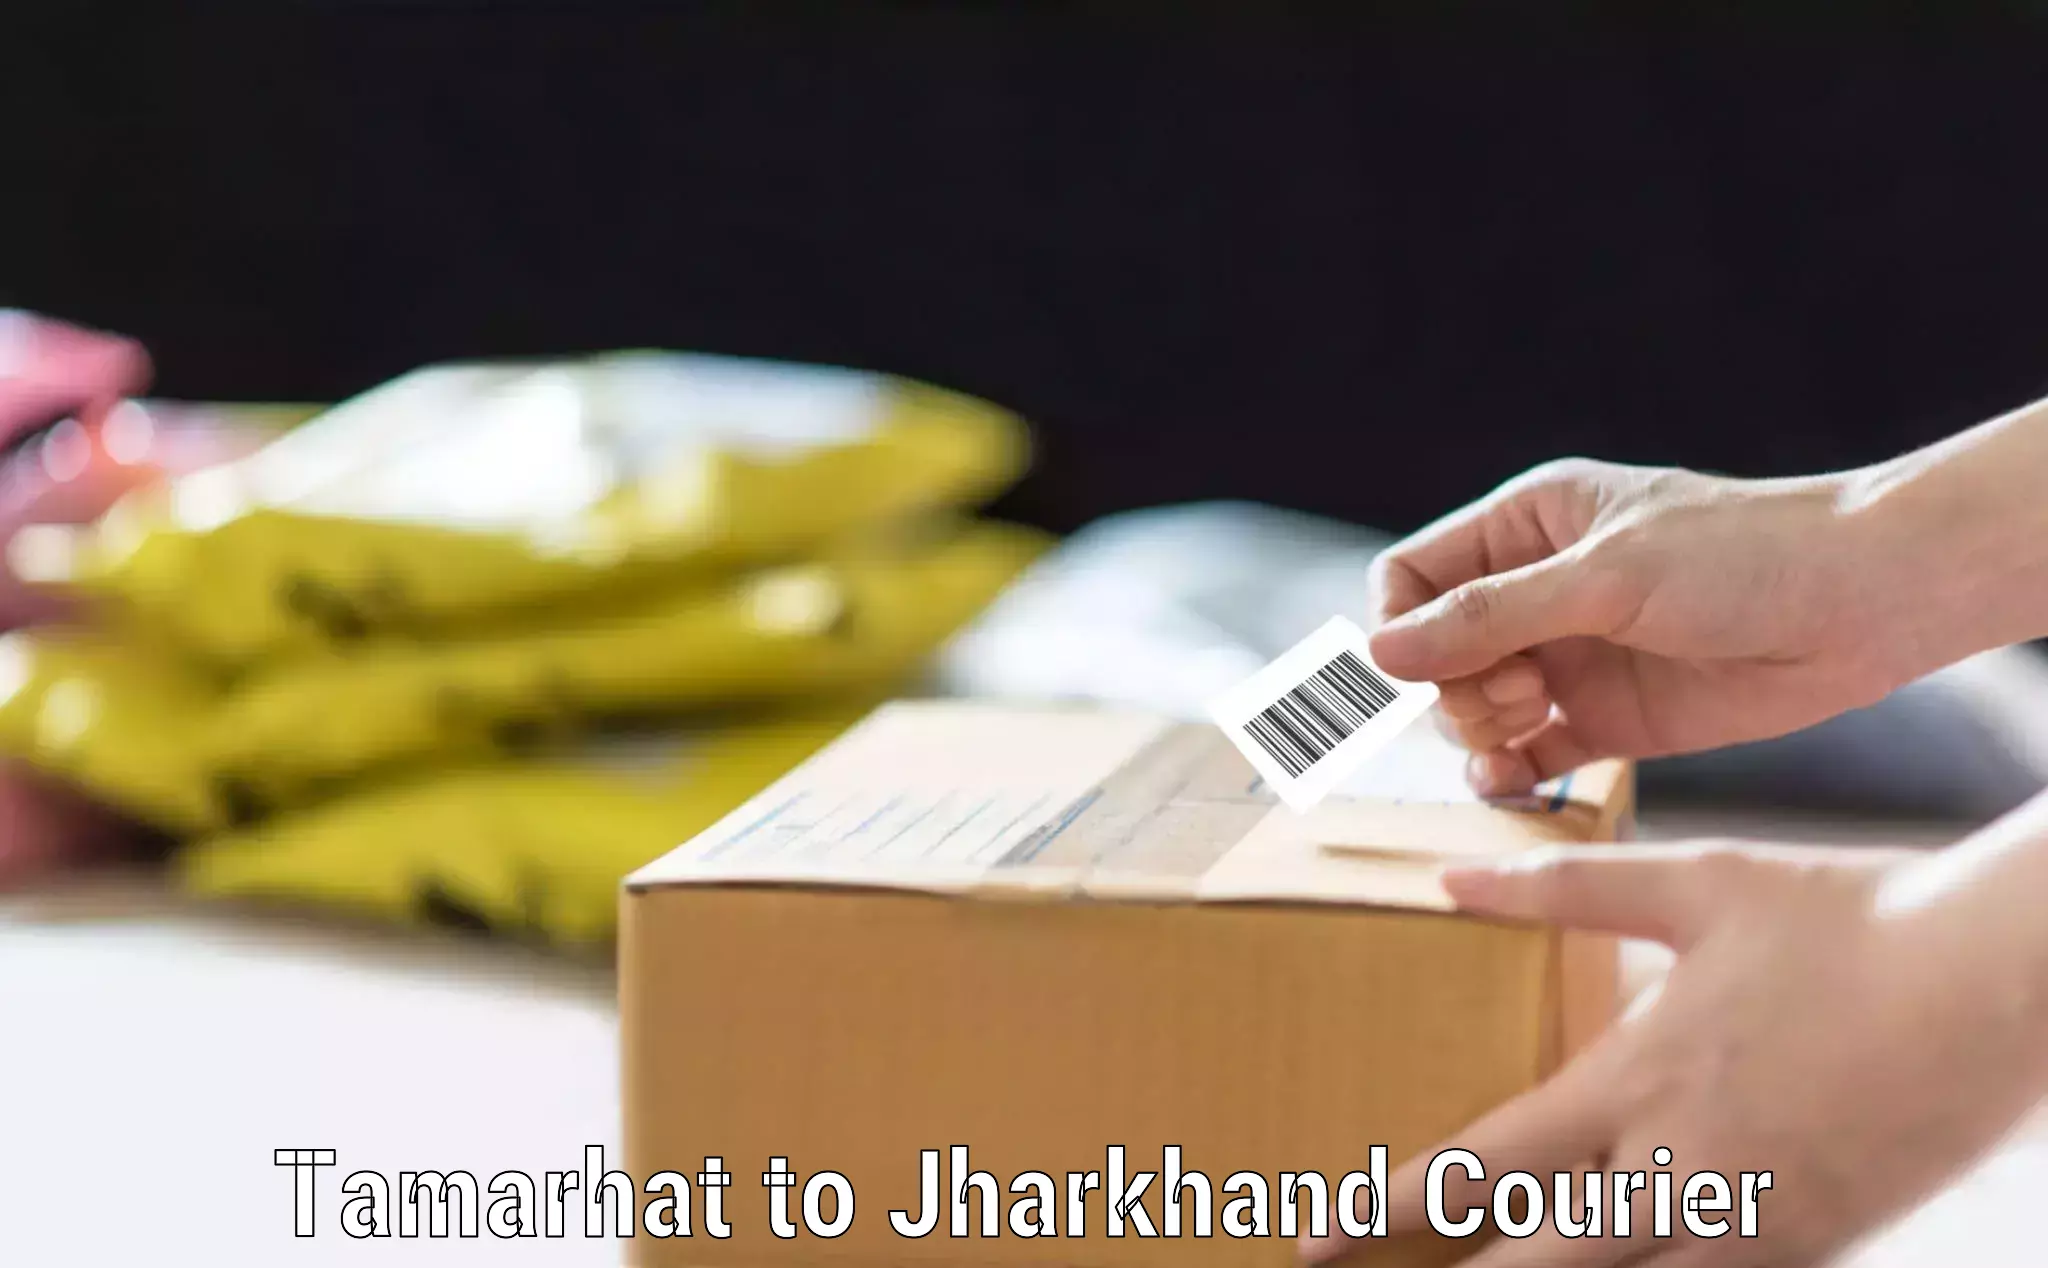 Luggage transport deals Tamarhat to Jharkhand